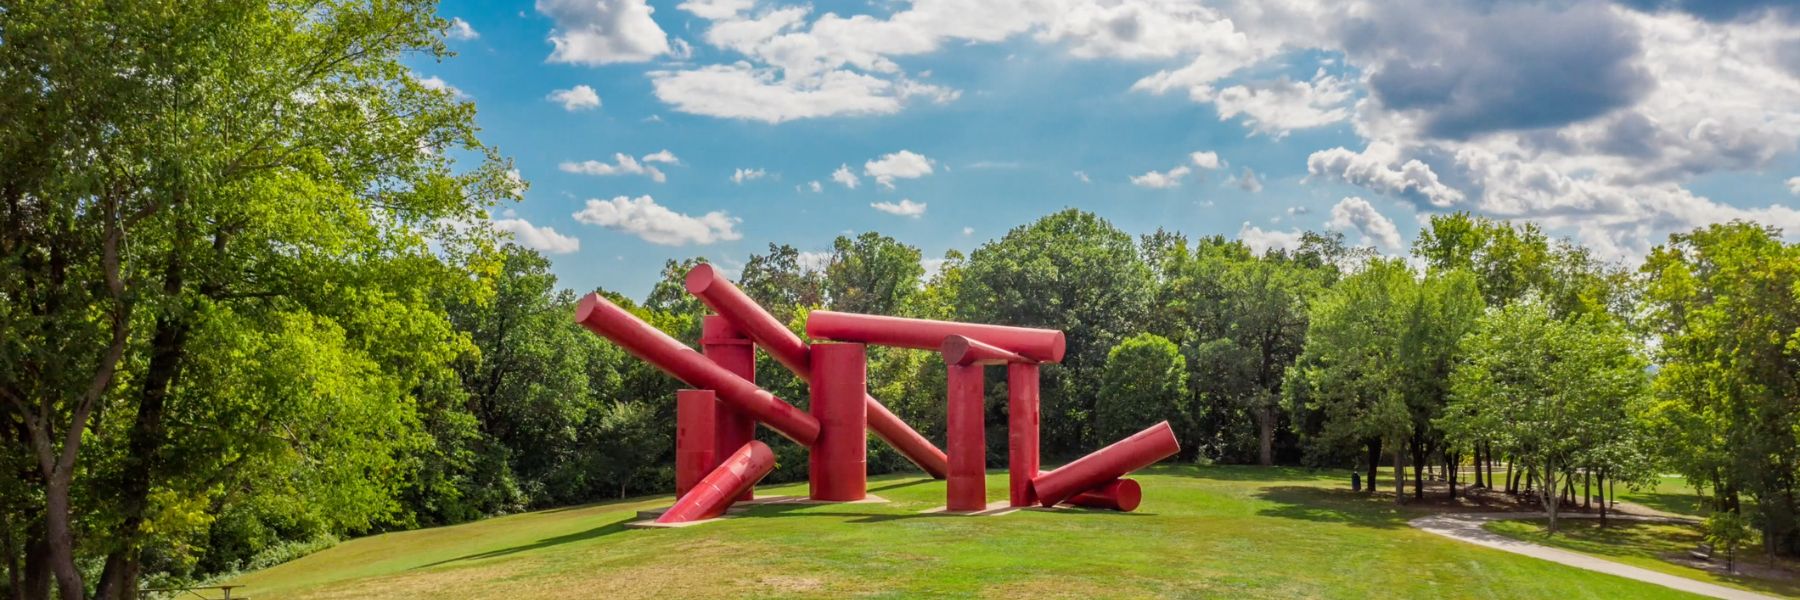 The Way, an outdoor sculpture at Laumeier Sculpture Park, features giant red cylinders.